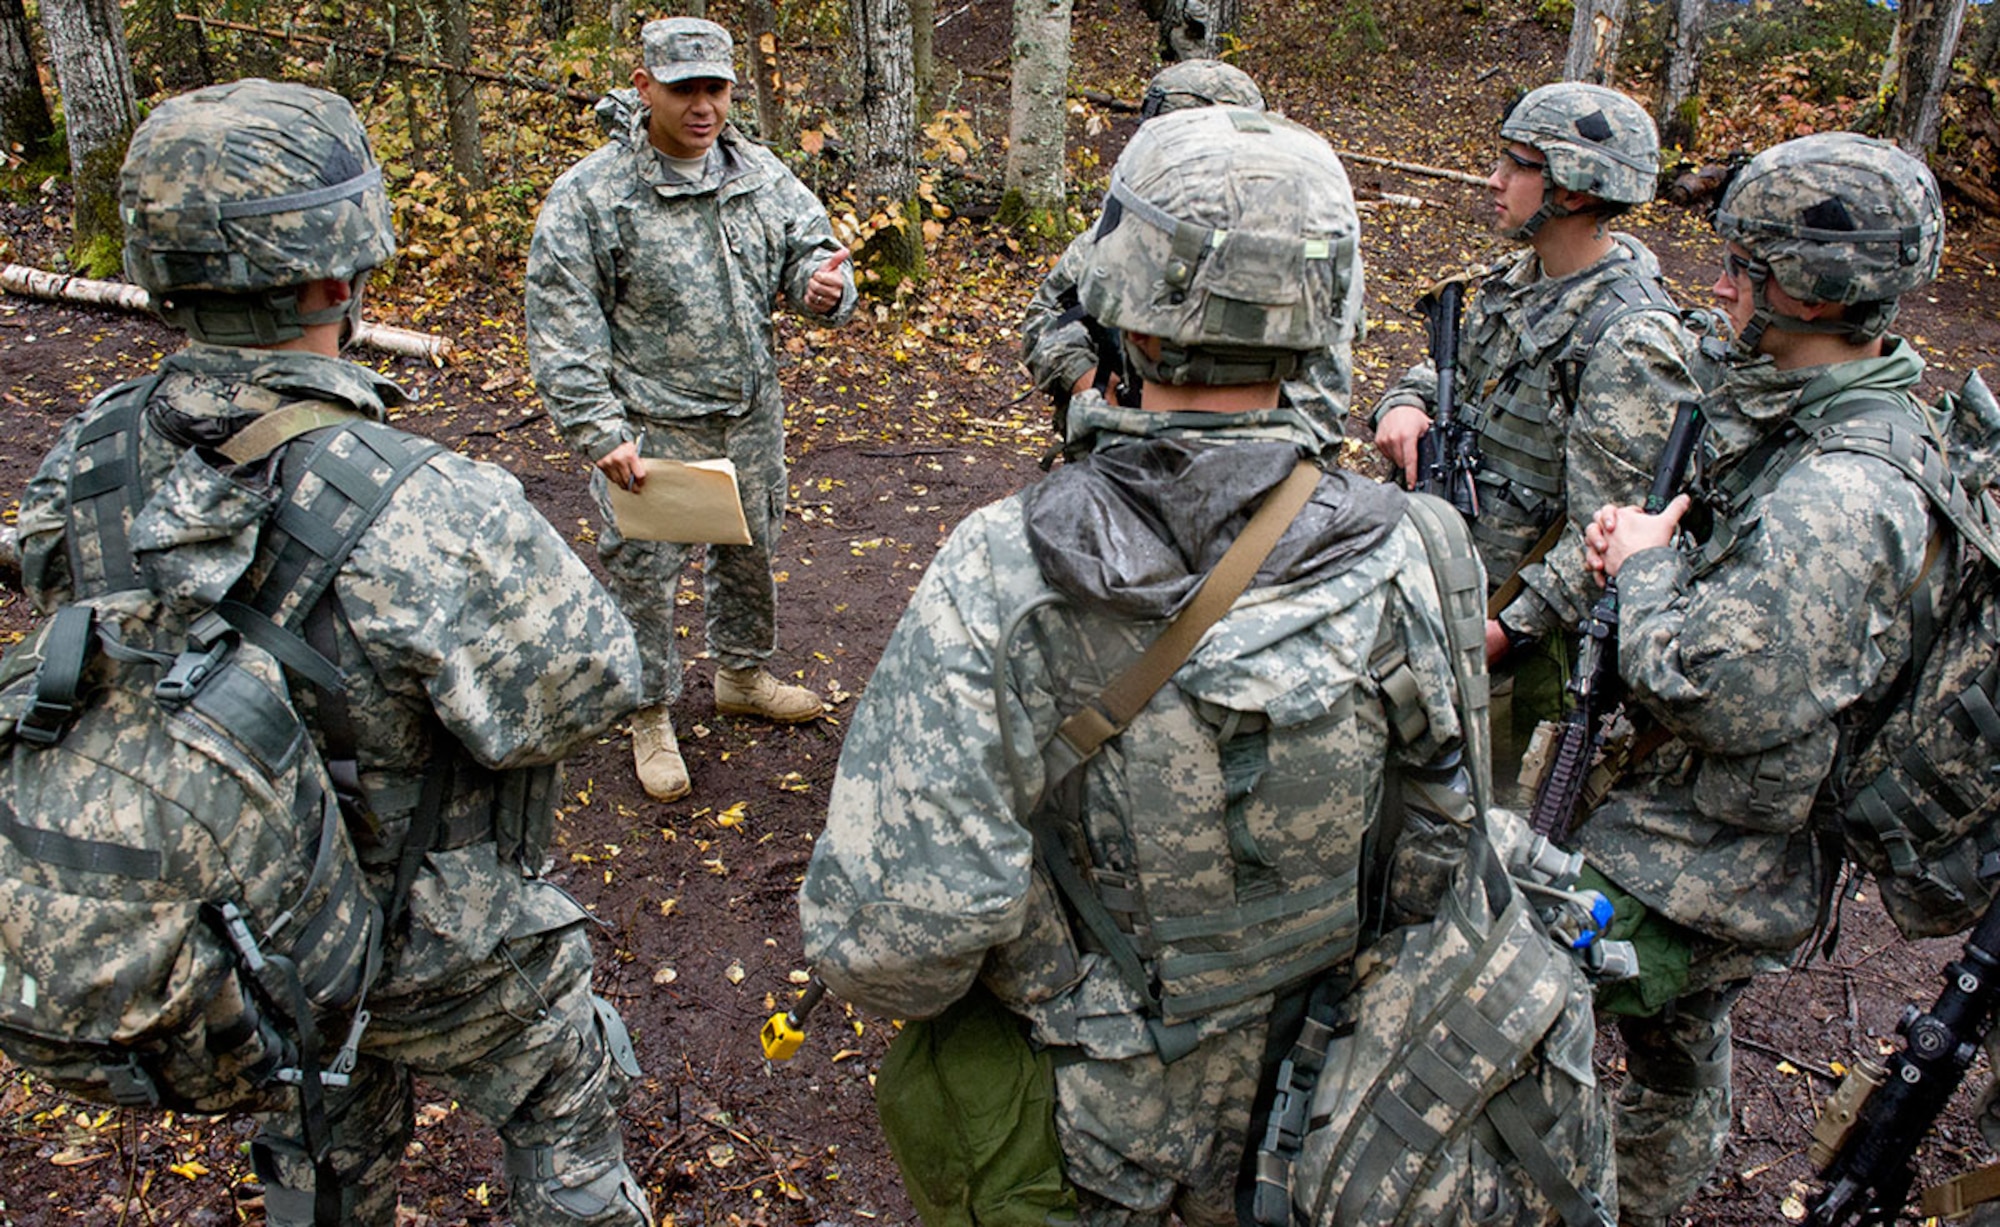 Army 1st Sgt. Nicholas Rembula, a native of Dallas, Texas, assigned to Charlie Company, 1st Battalion (Airborne), 501st Infantry Regiment, 4th Infantry Brigade Combat Team (Airborne), 25th Infantry Division, U.S. Army Alaska, talks to candidates on an Expert Infantryman Badge qualification lane on Joint Base Elmendorf-Richardson, Wednesday, Sept. 10, 2014. The Expert Infantryman Badge was approved by the Secretary of War on October 7, 1943, and is currently awarded to U.S. Army personnel who hold infantry or special forces military occupational specialties and successfully pass the rigors of the course. (U.S. Air Force photo/Justin Connaher)